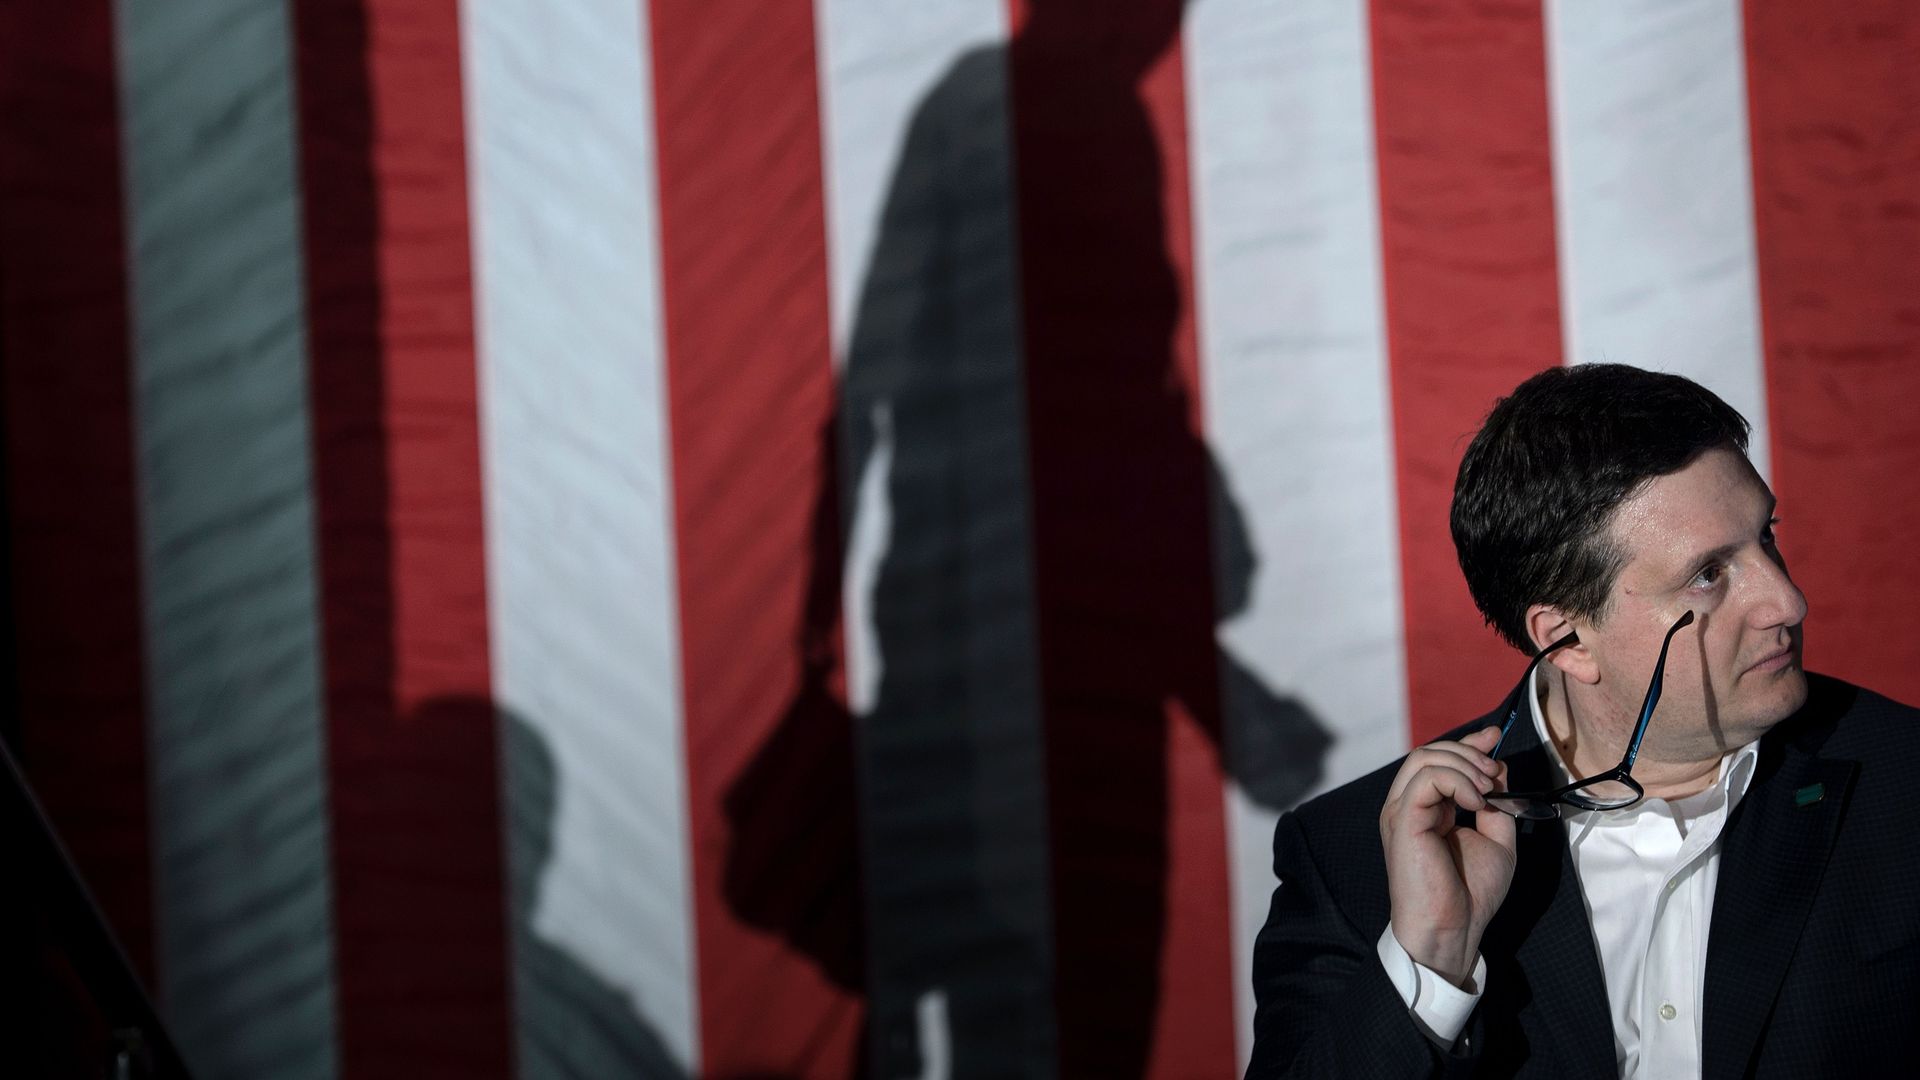 Philippe Reines sits and holds his glasses to his face with a large American flag behind him, and the shadow of Hillary Clinton walking on stage.